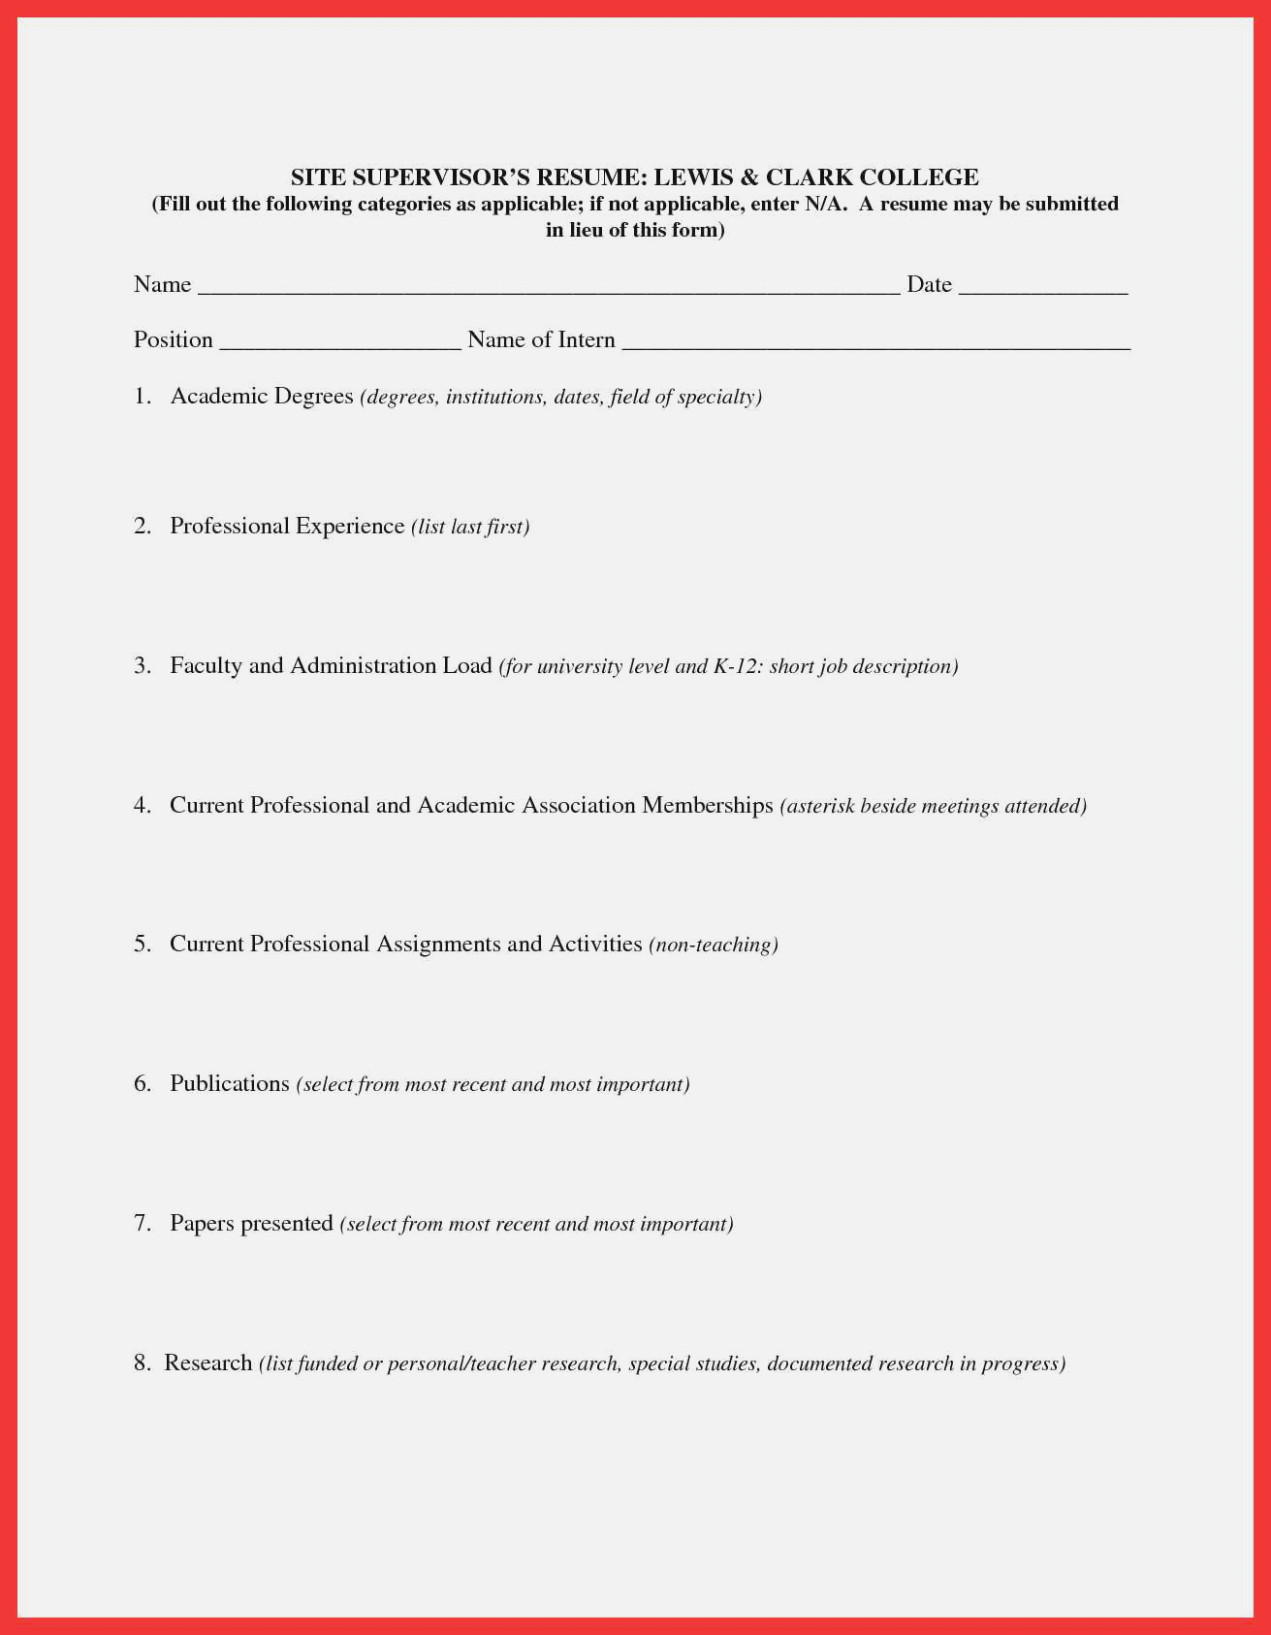 How To Fill Out A Resume How To Fill Out Resume For Job Coles Thecolossus Co Throughout A How Do I Fill Out A Resume how to fill out a resume|wikiresume.com